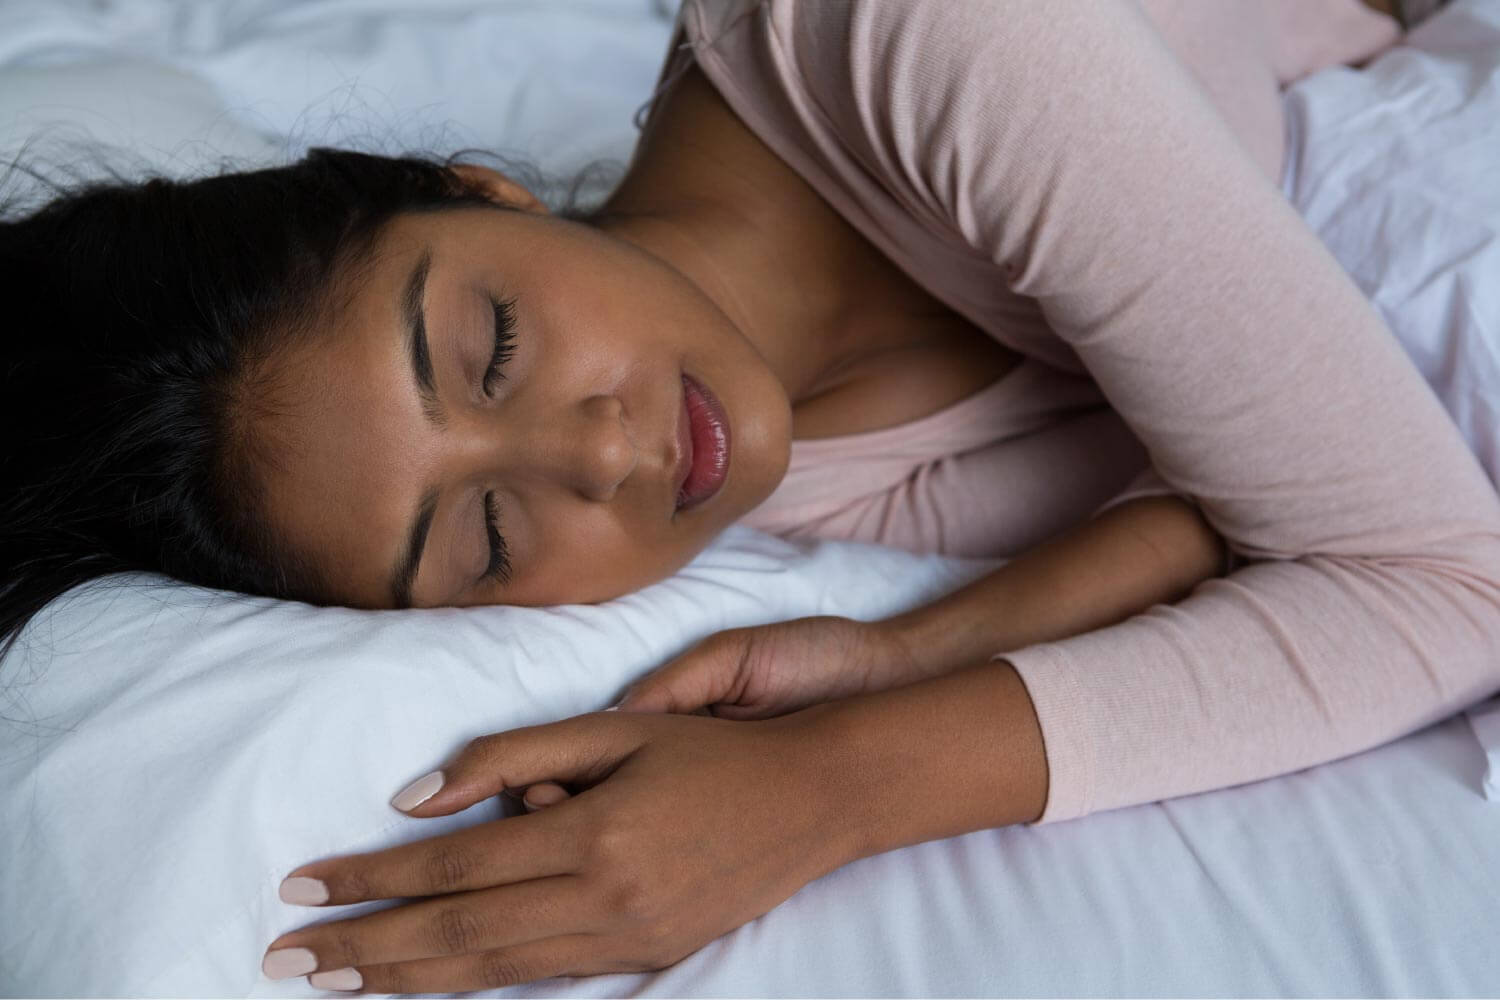 Woman in a pink sweater sleeps with her Invisalign in at night to total 20-22 hours a day of wear